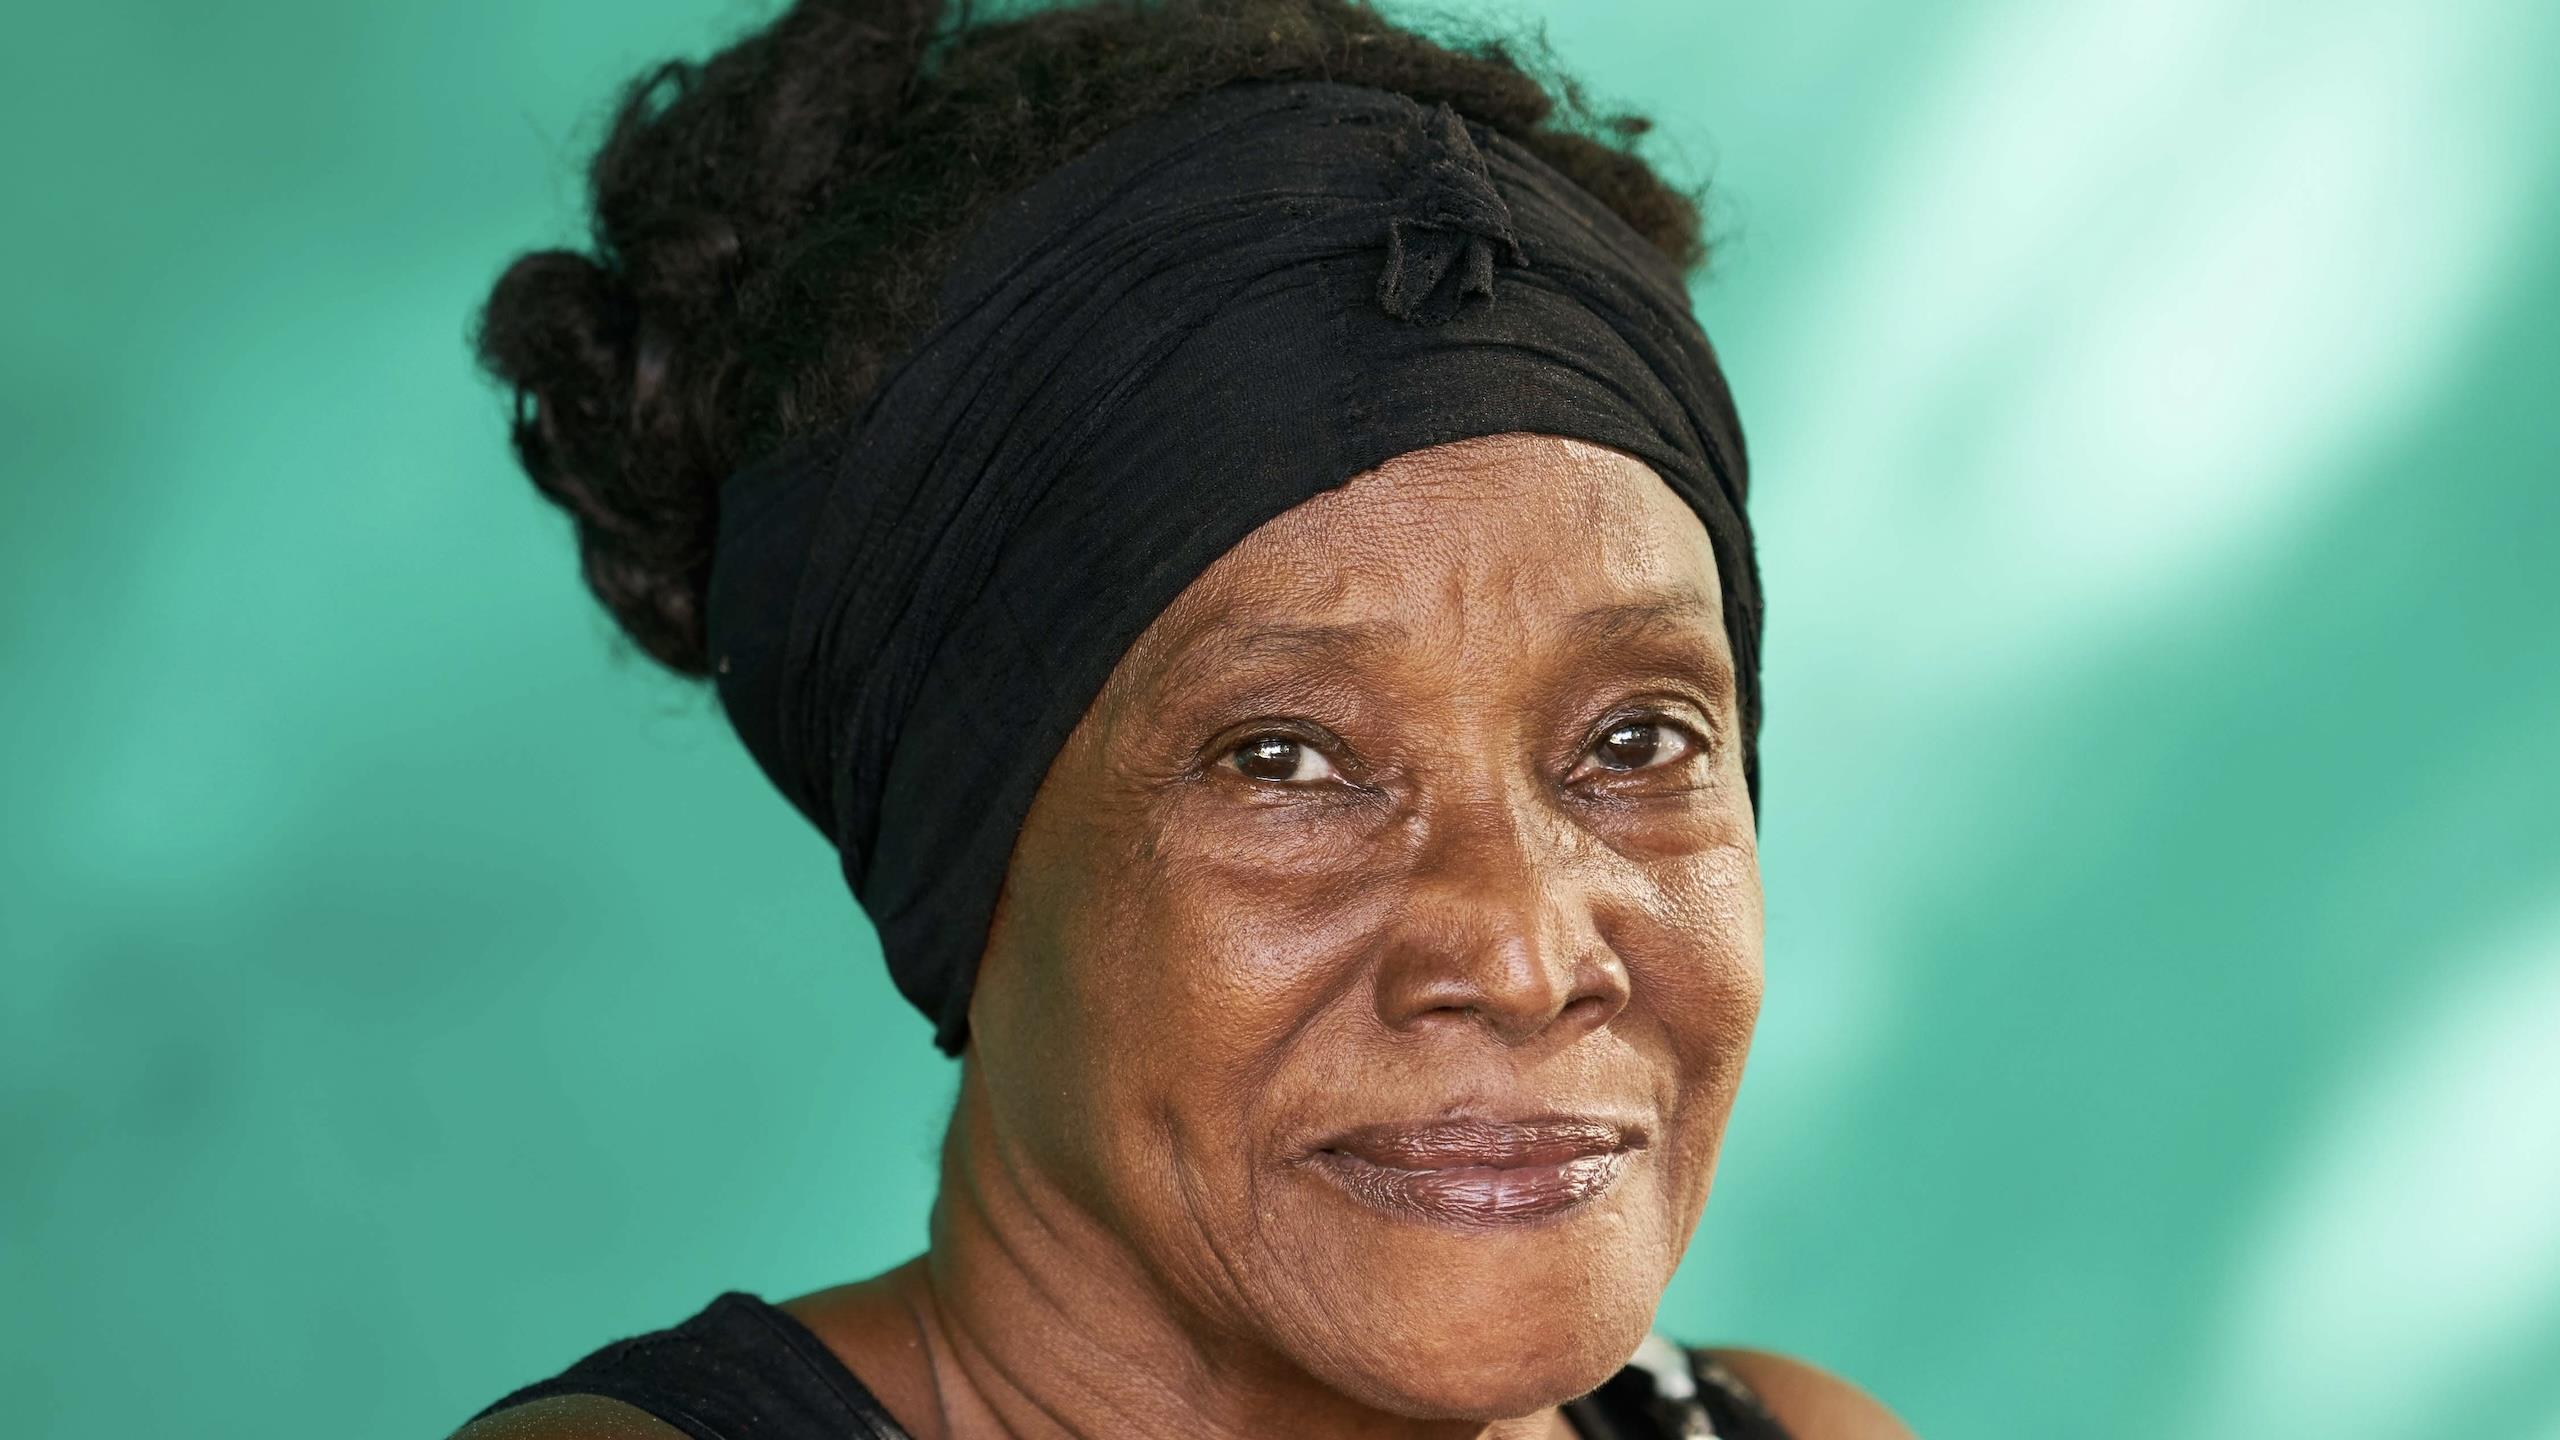 Elderly Cuban woman looking into the camera. Green background.